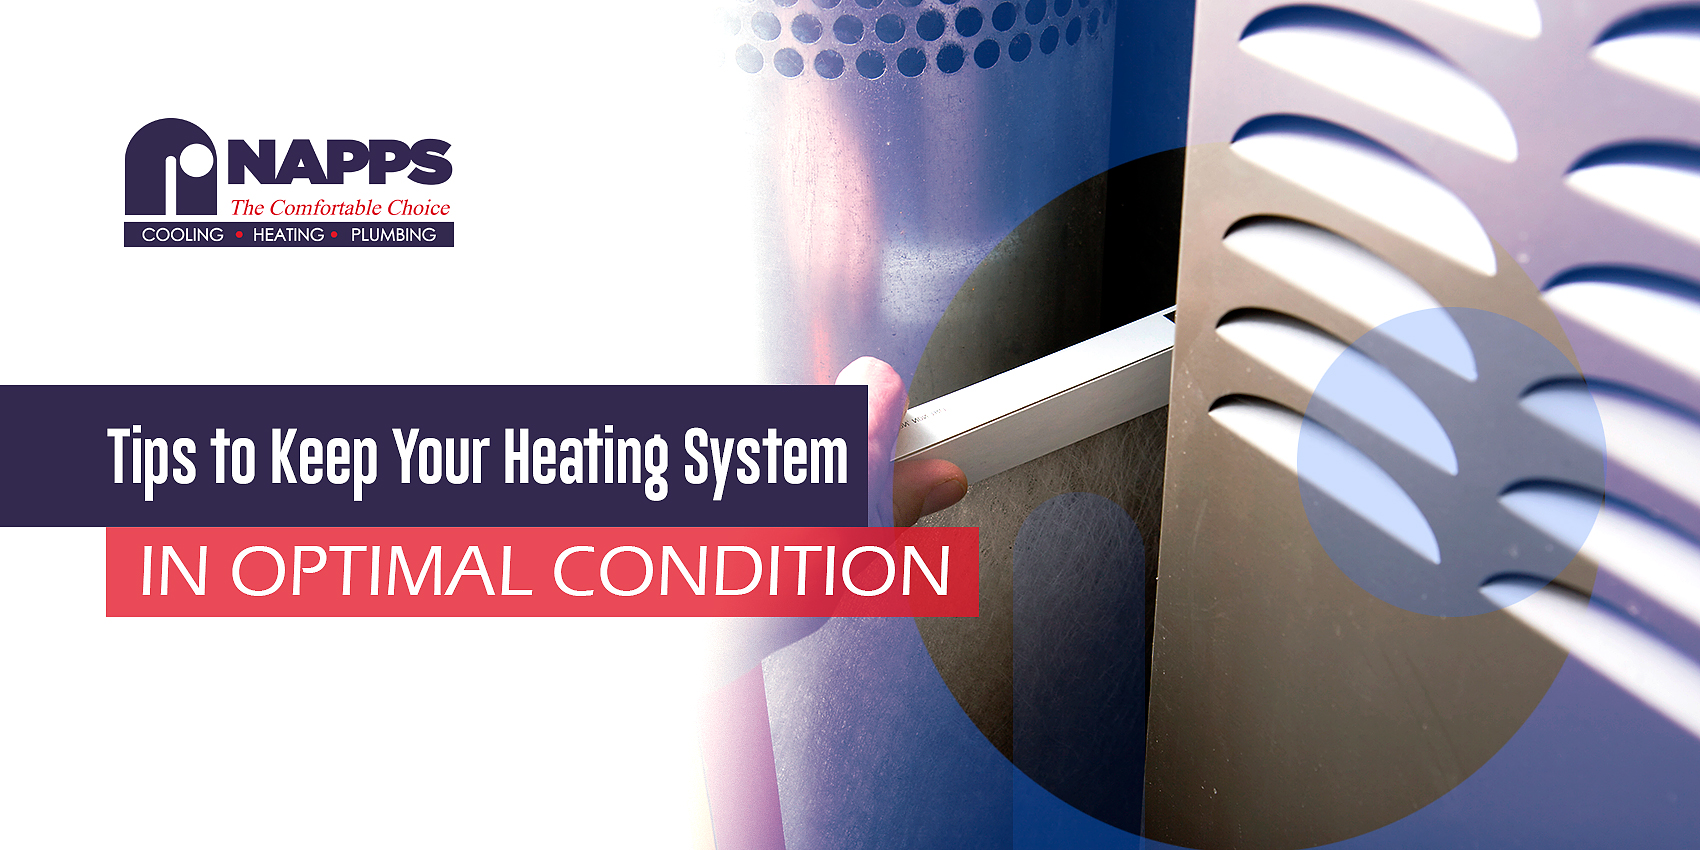  Keep your heating system in optimal condition tips 